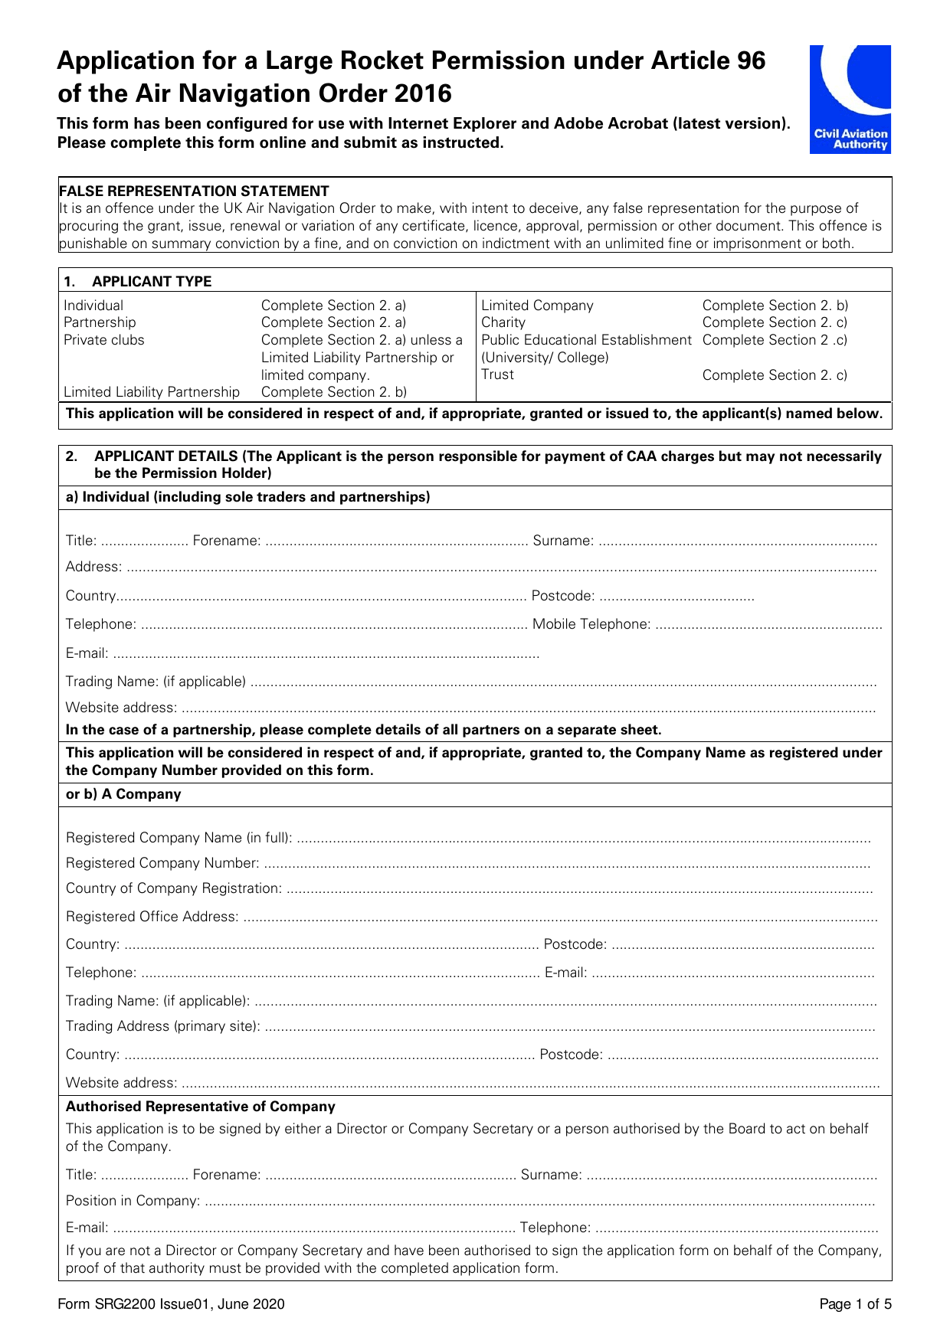 Form SRG2200 Application for a Large Rocket Permission Under Article 96 of the Air Navigation Order 2016 - United Kingdom, Page 1